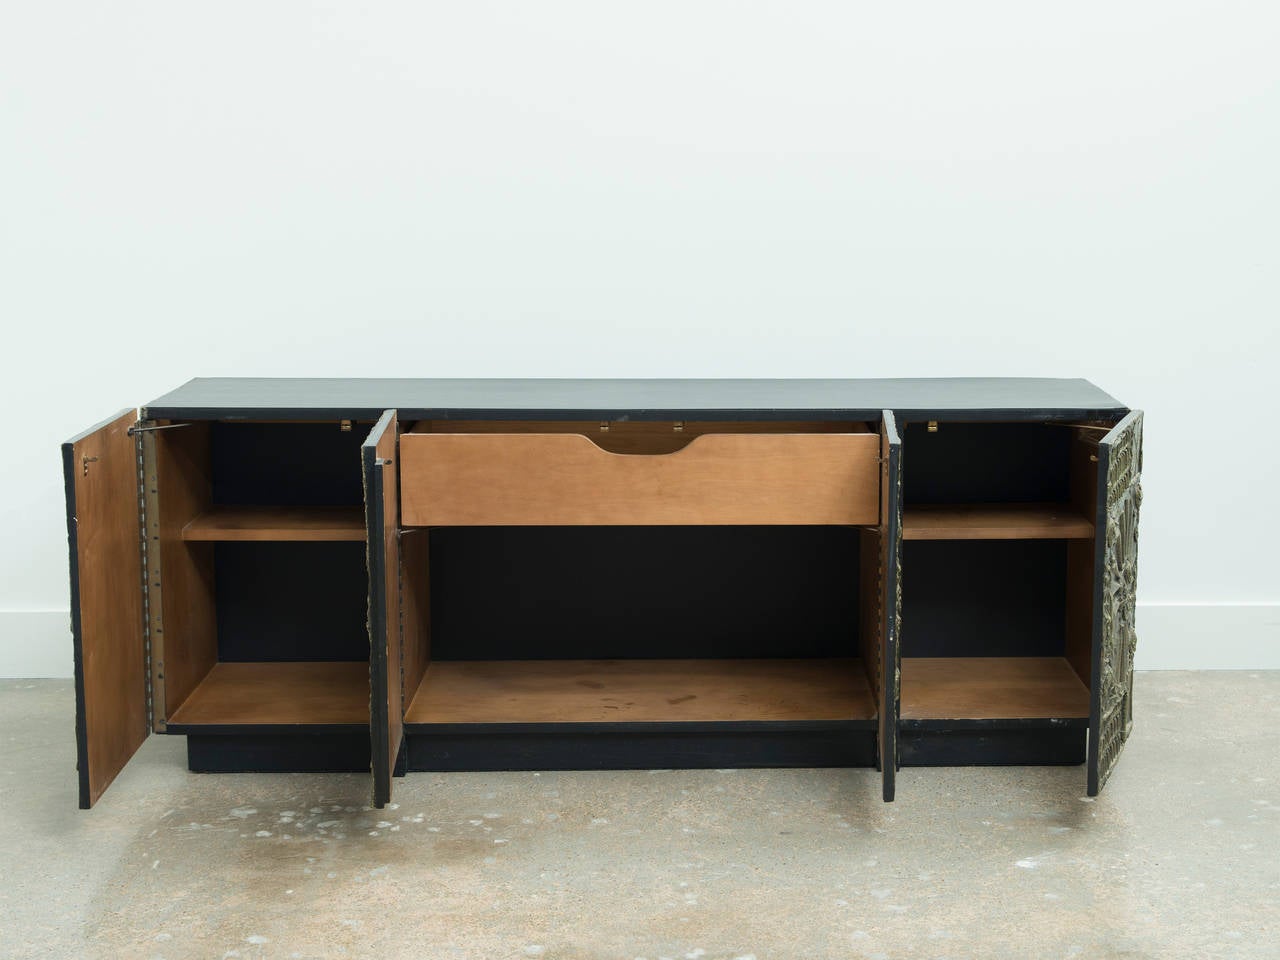 Adrian Pearsall Brutalist style credenza in the manner of Paul Evans.  Adrian Pearsall was known for his expressive American furniture of the 1950s and 1960s.  His flamboyant style is what is known as the 